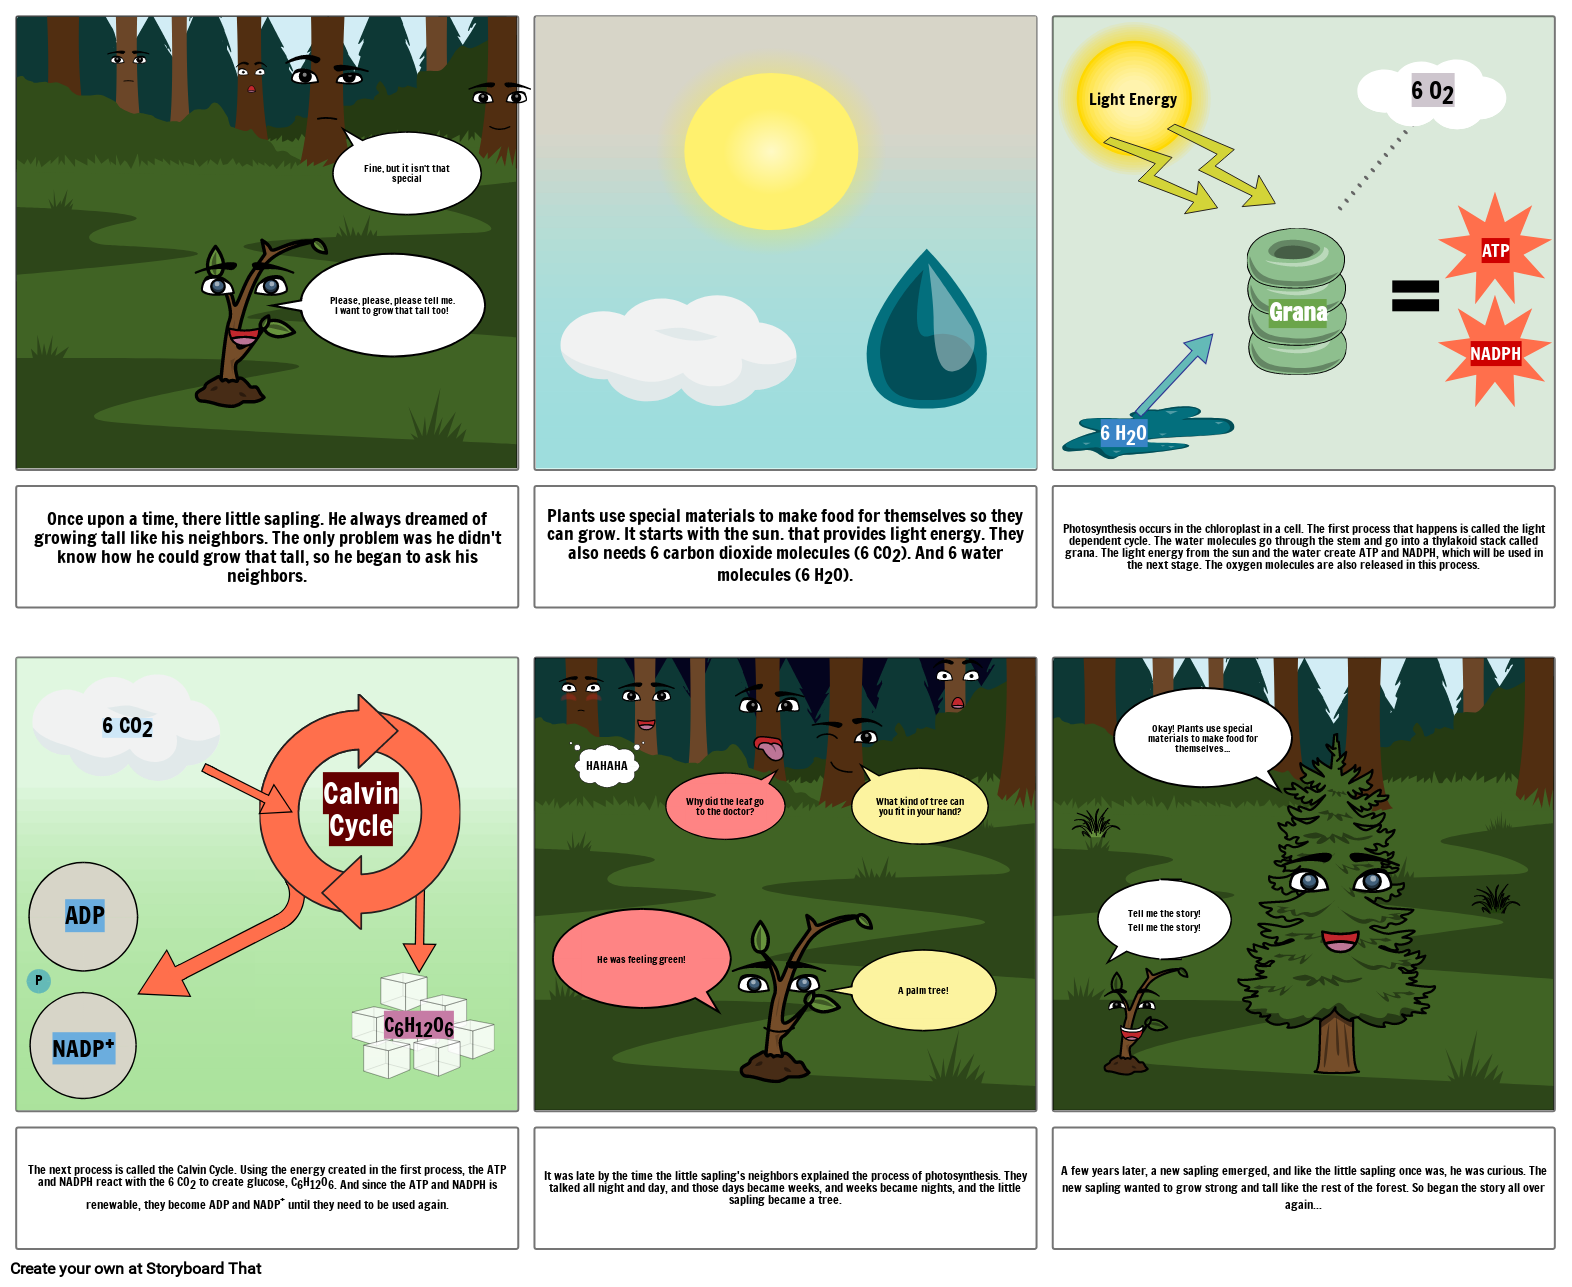 The Process of Photosynthesis